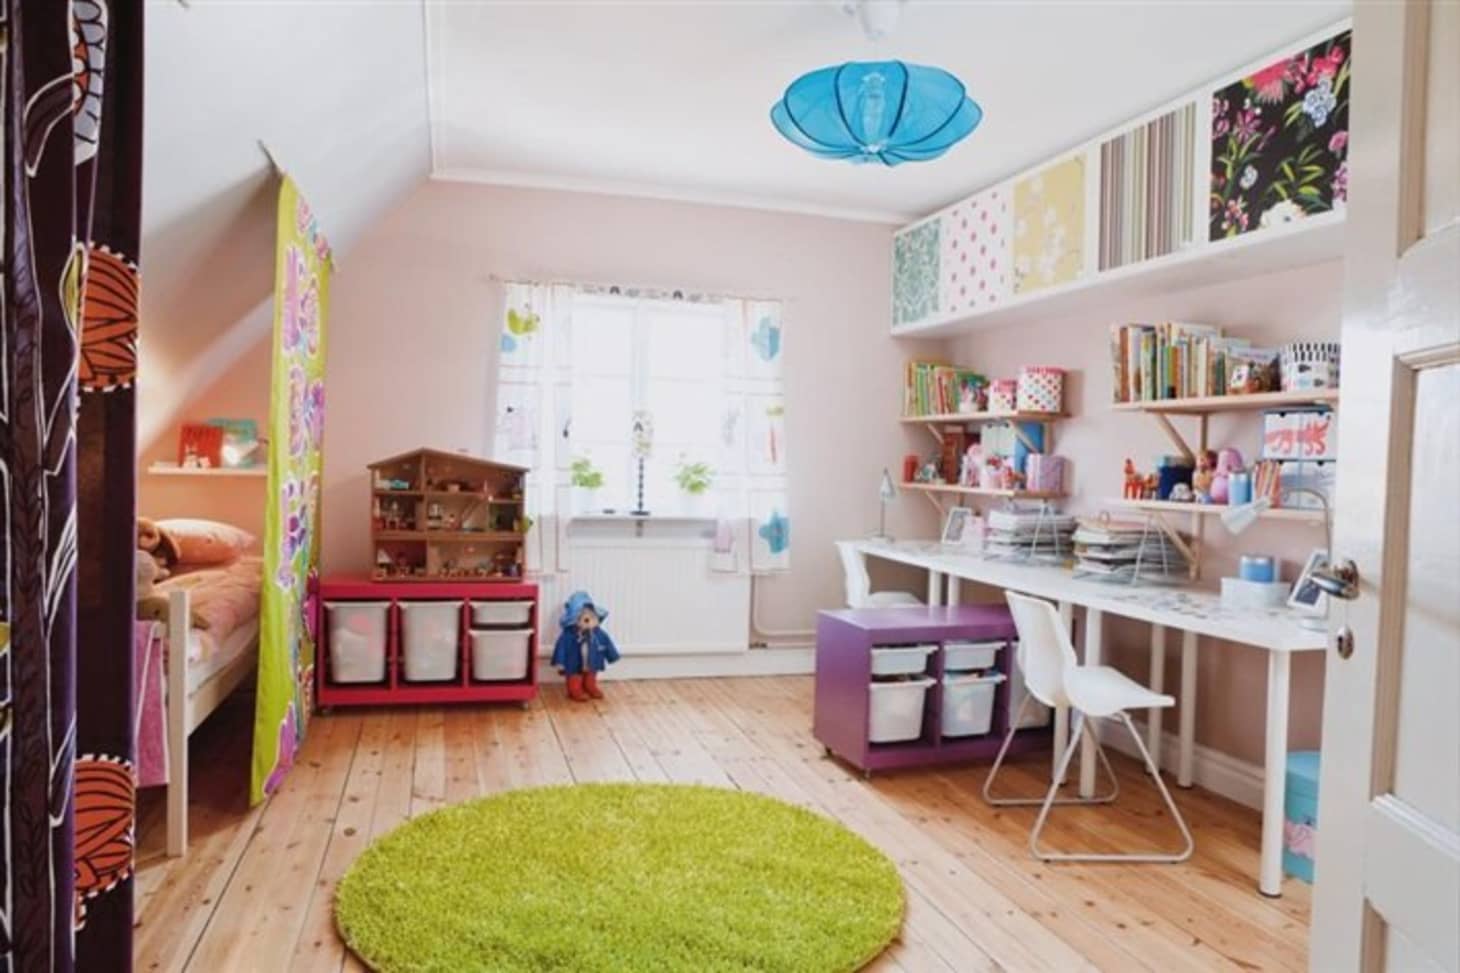 Kids Rooms Using Ikea Trofast Storage Apartment Therapy